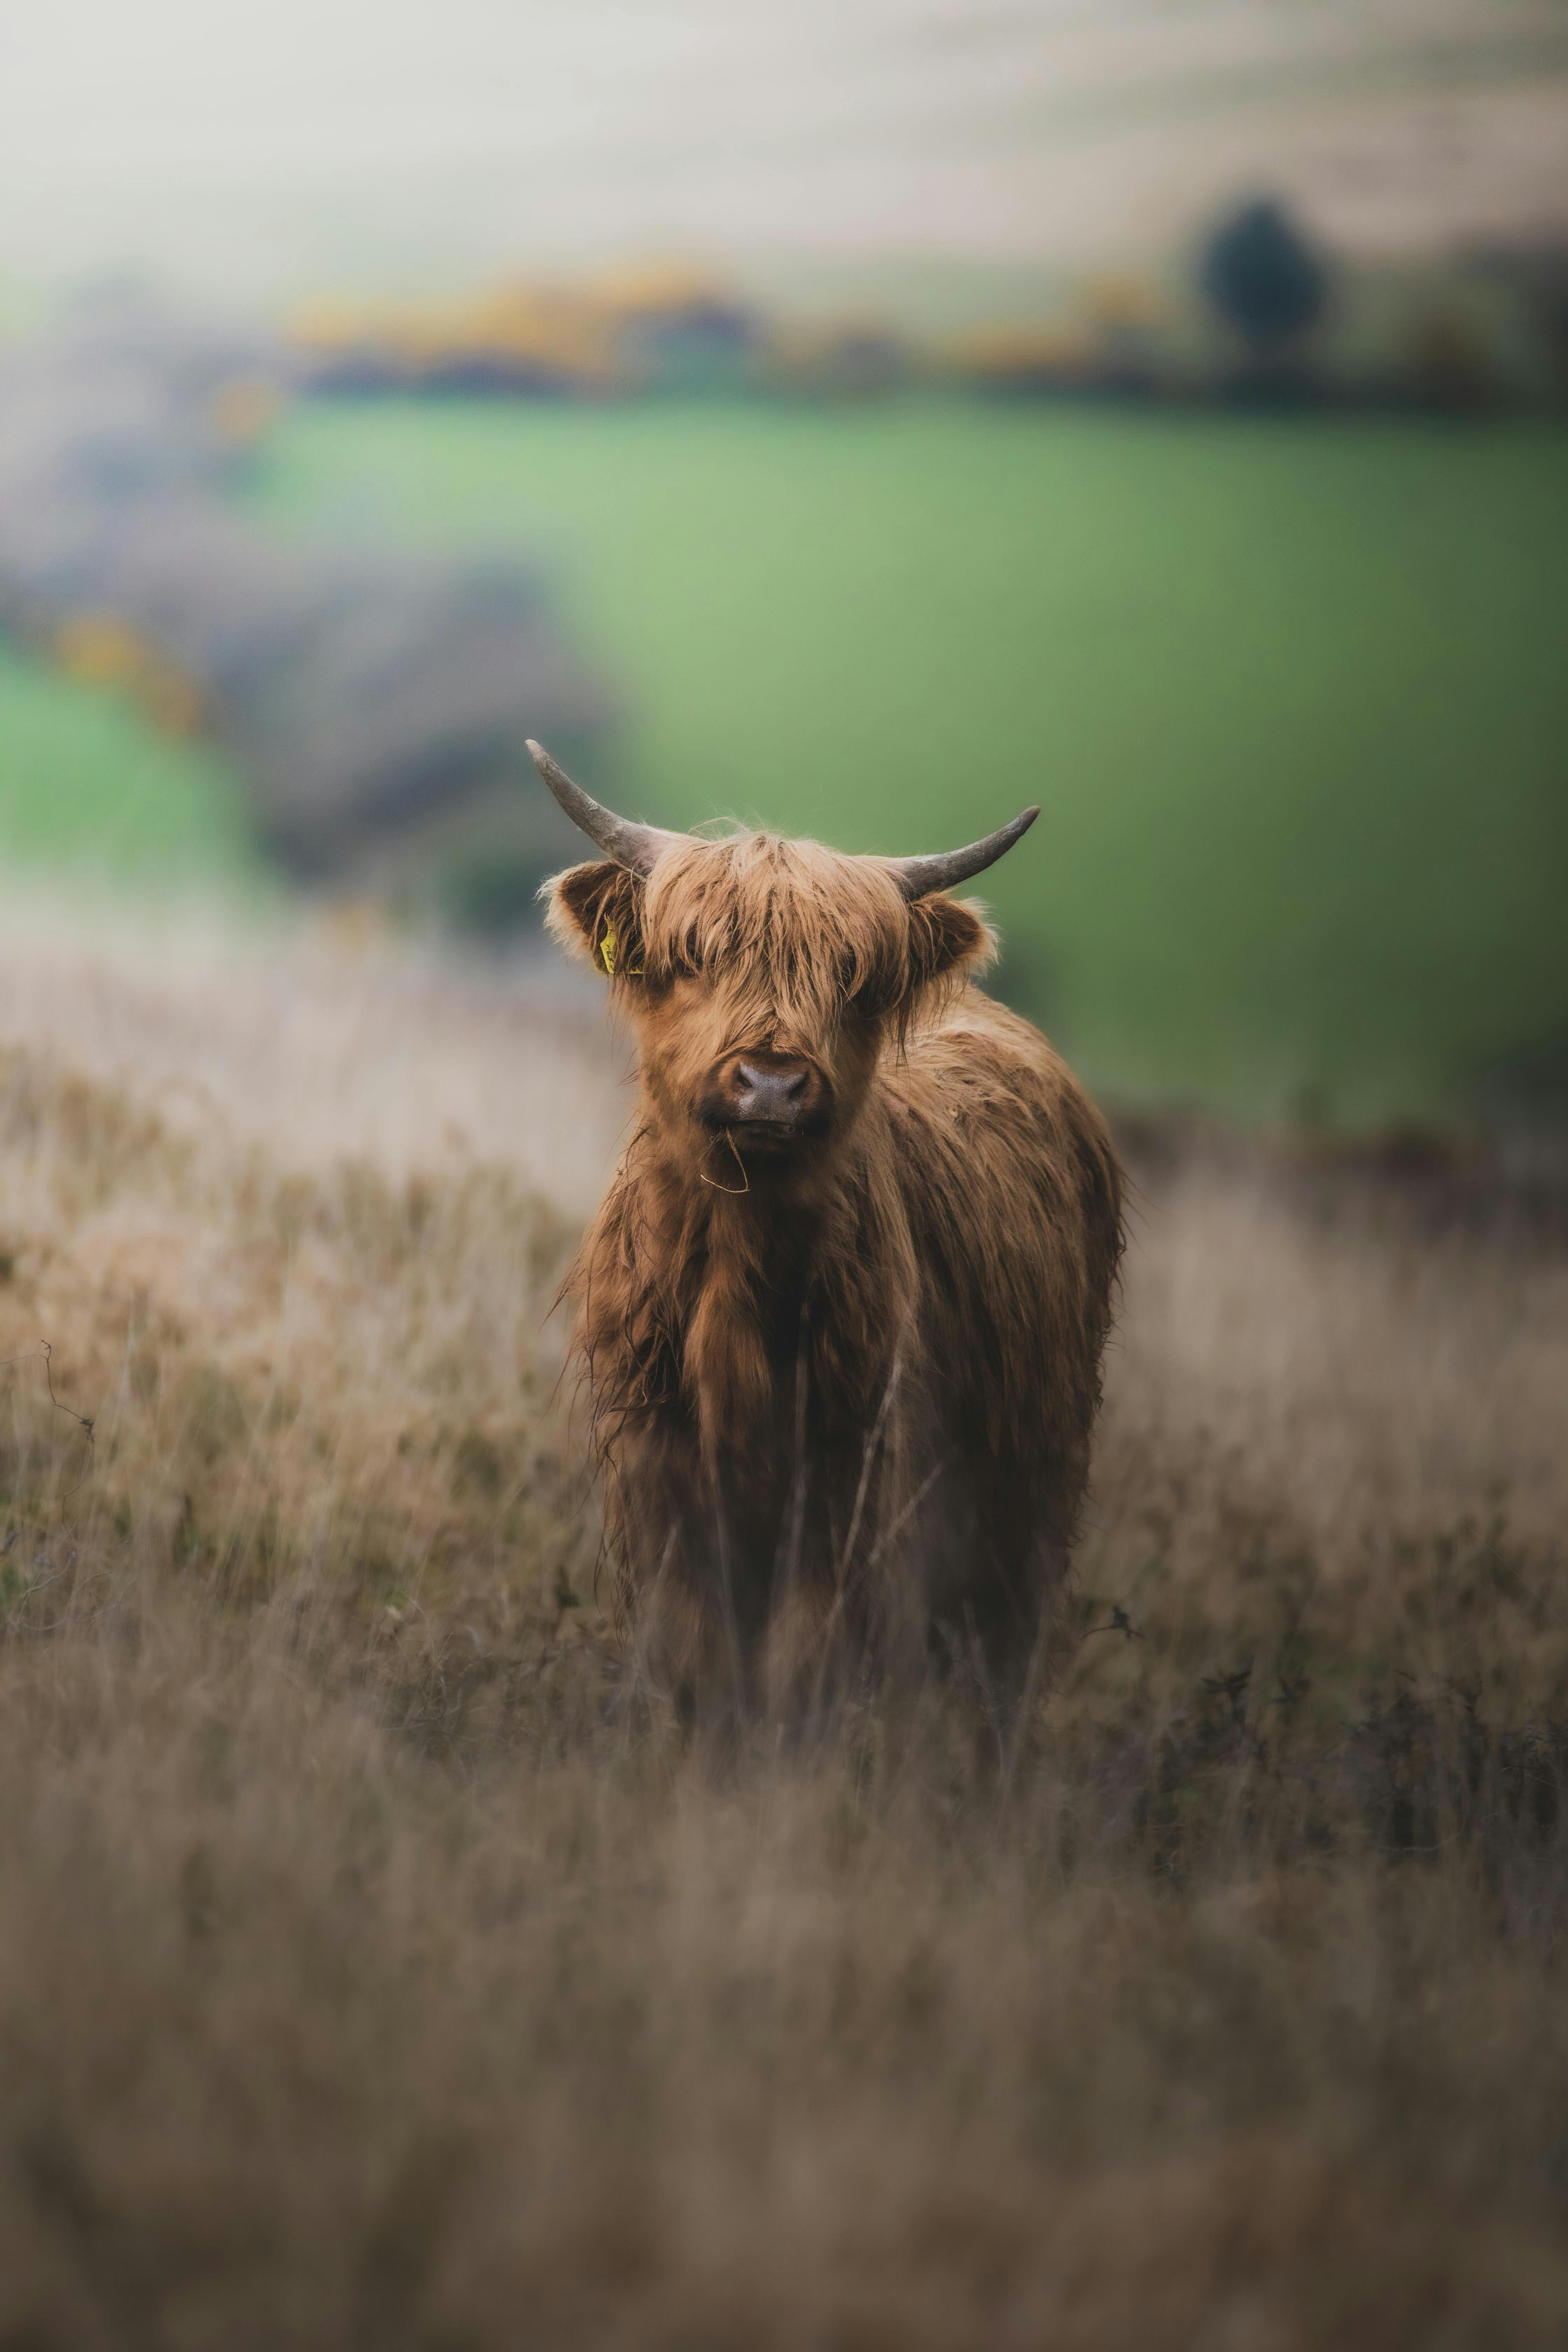 Highland Cattle on Field